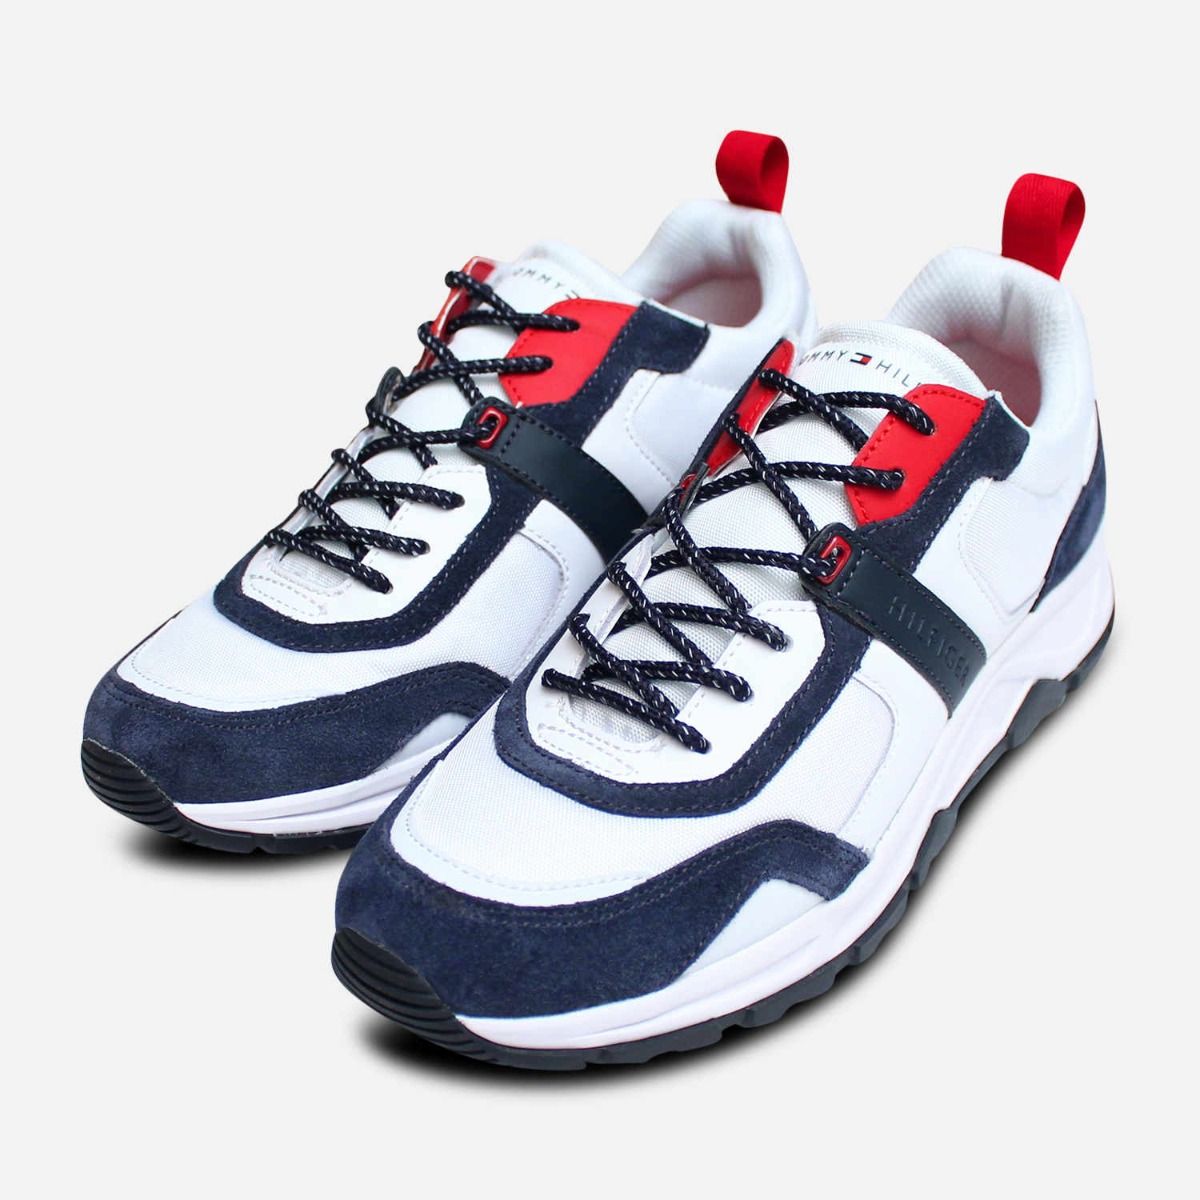 red white blue mens shoes